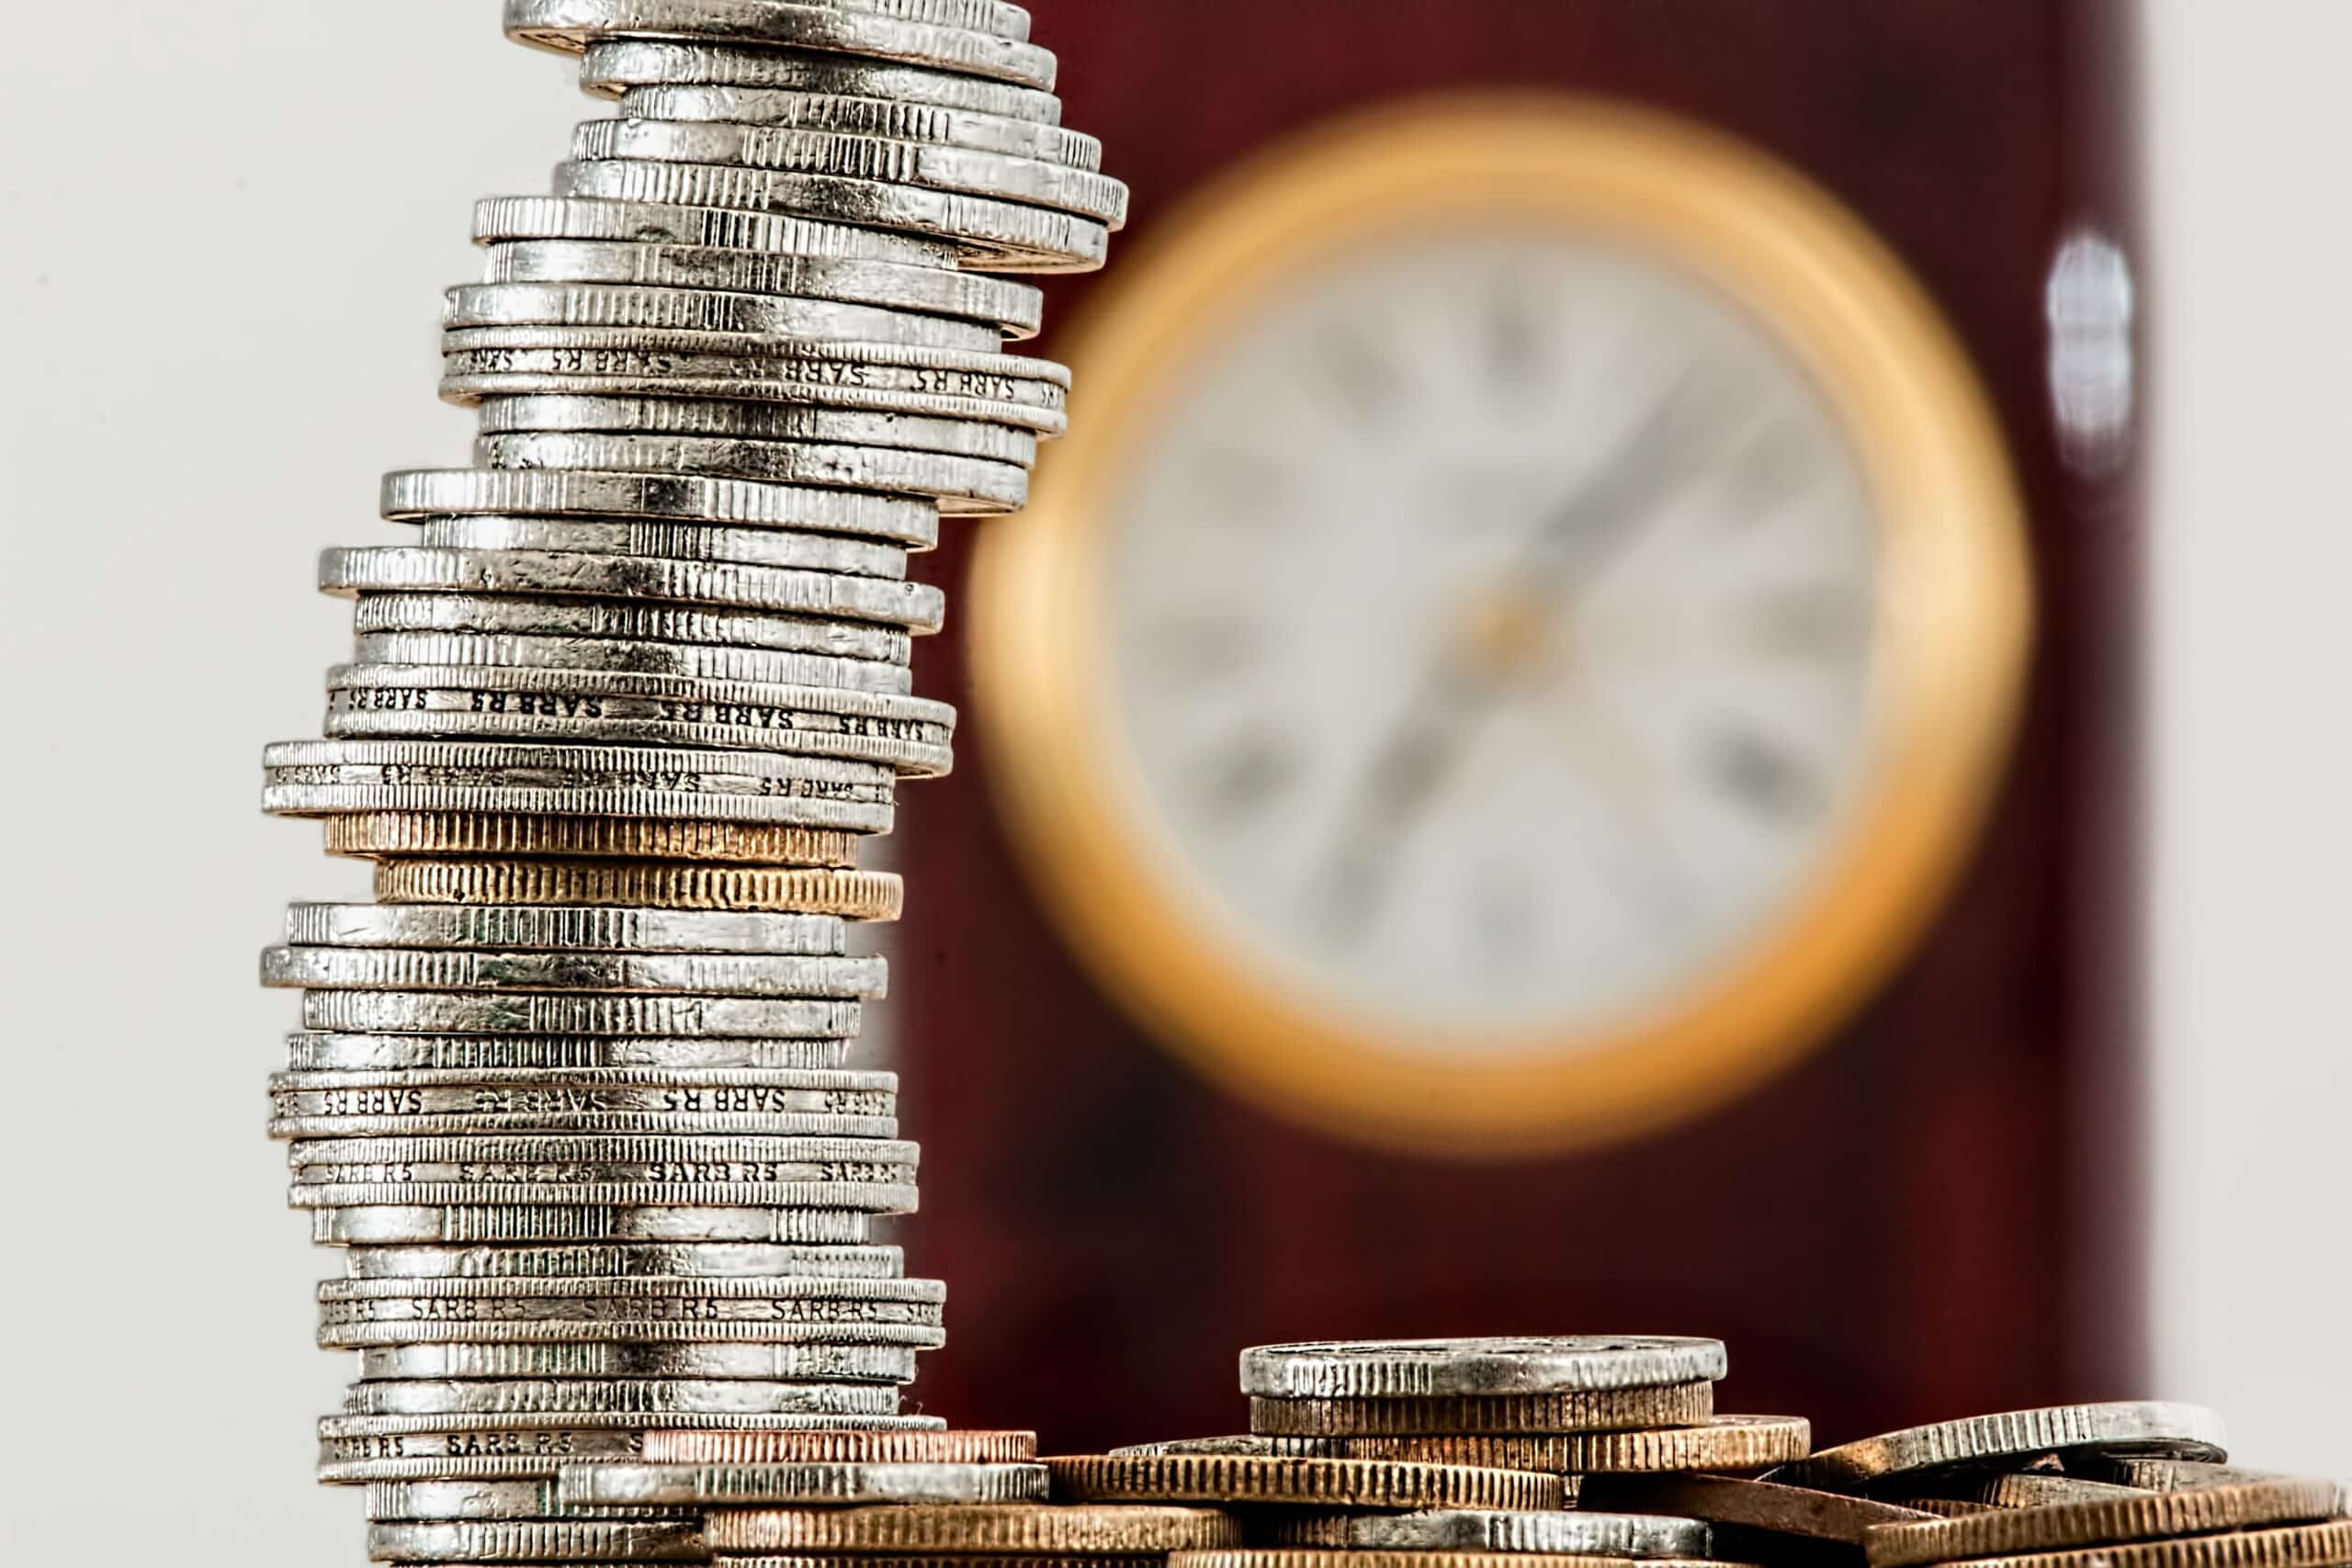 A stack of coins sits in front of a clock that is blurred in the background